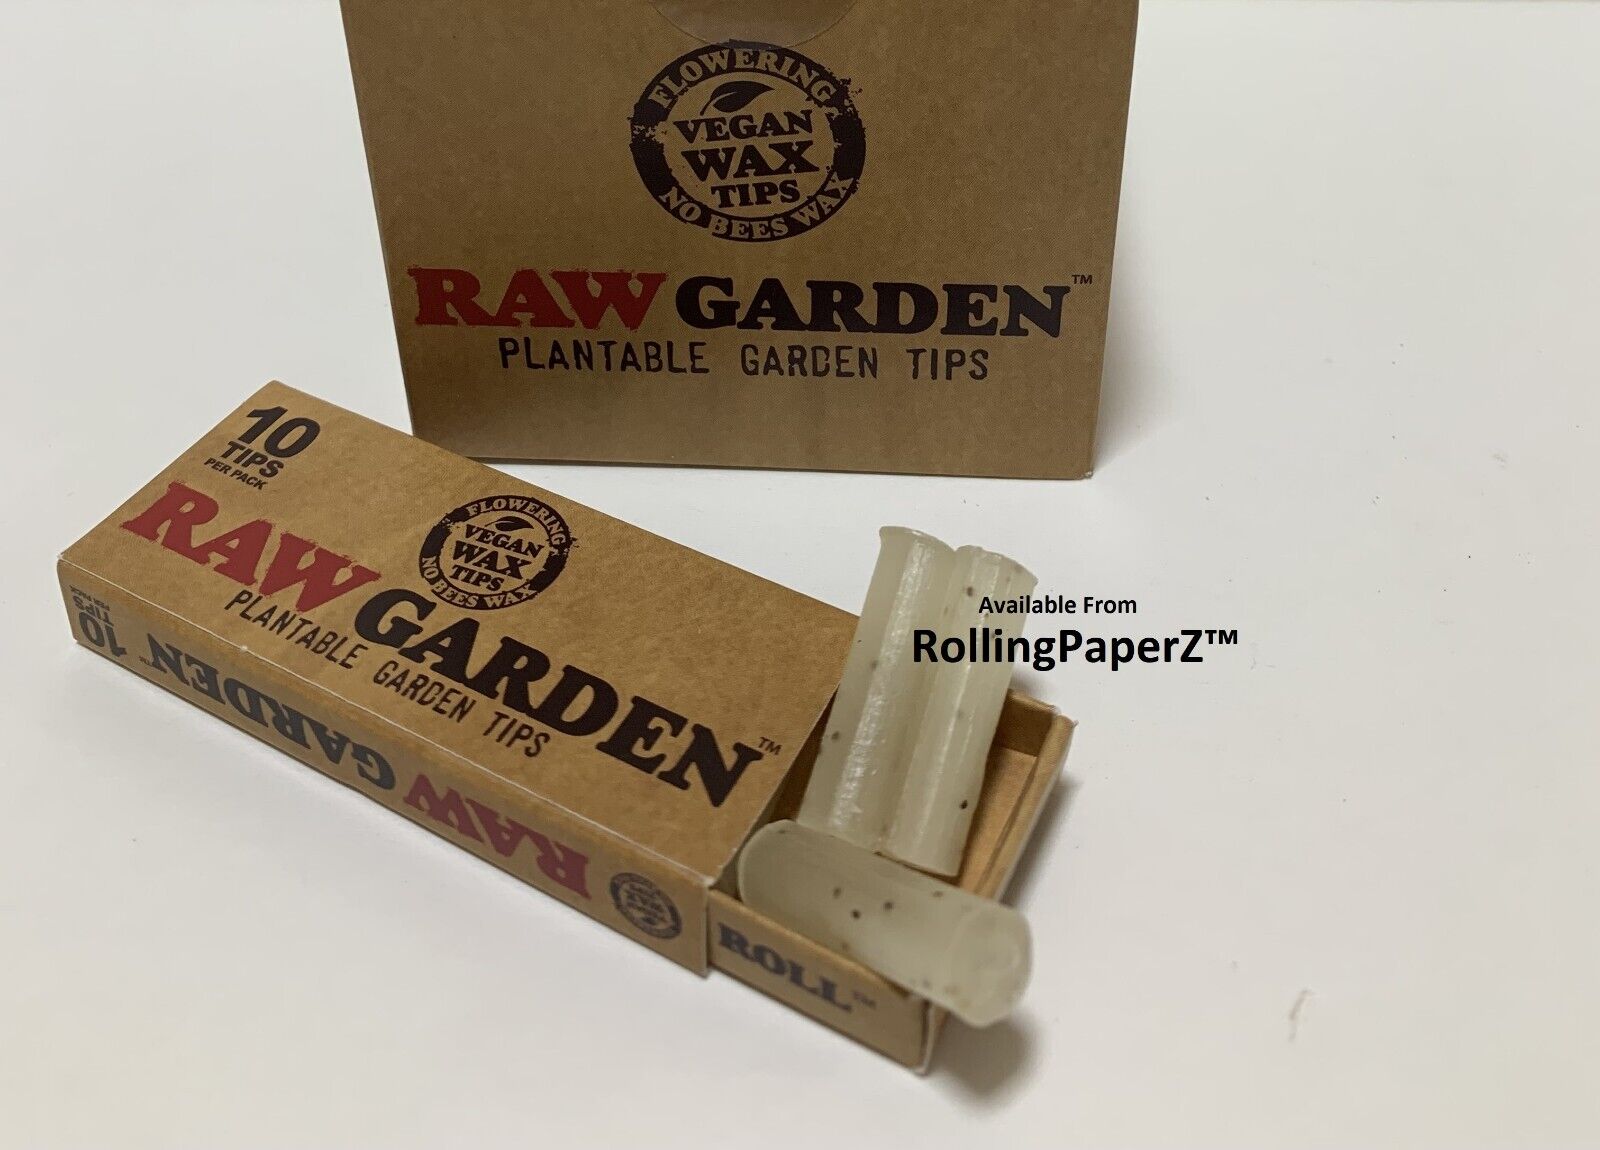 New RAW GARDEN Plantable Garden TIPS with seeds inside 10 wax tips per pack